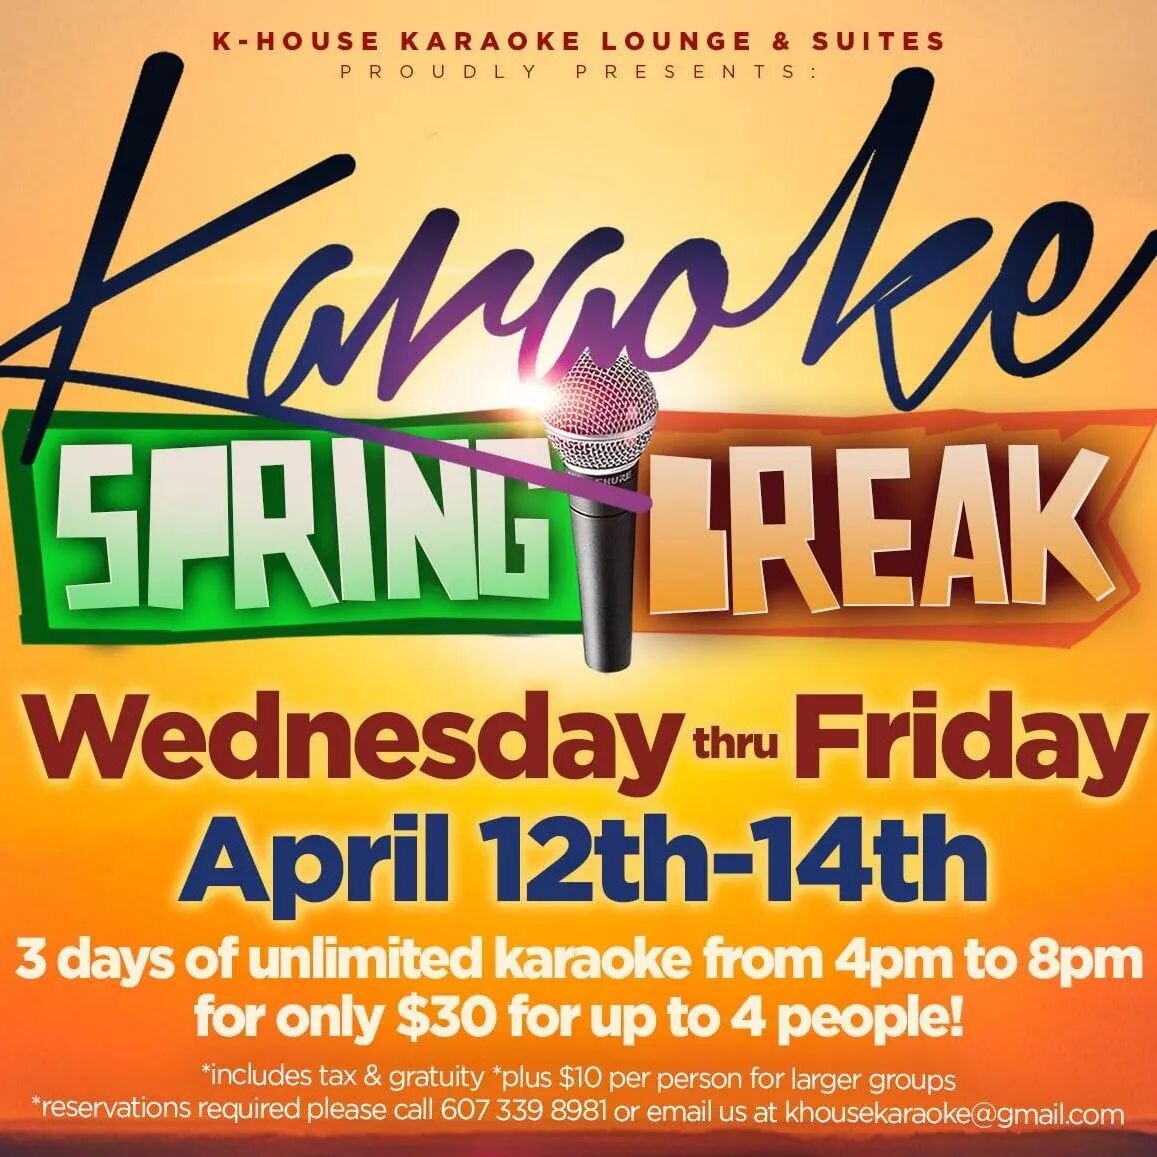 Spring Break is next week! Take advantage of our limited time special!

SPRING BREAK SPECIAL AND EARLY BIRD RATES ANNOUNCEMENT!

Perfect for all ages with family and friends! Check out our new discounted rates perfect for your next event! Fun idea fo